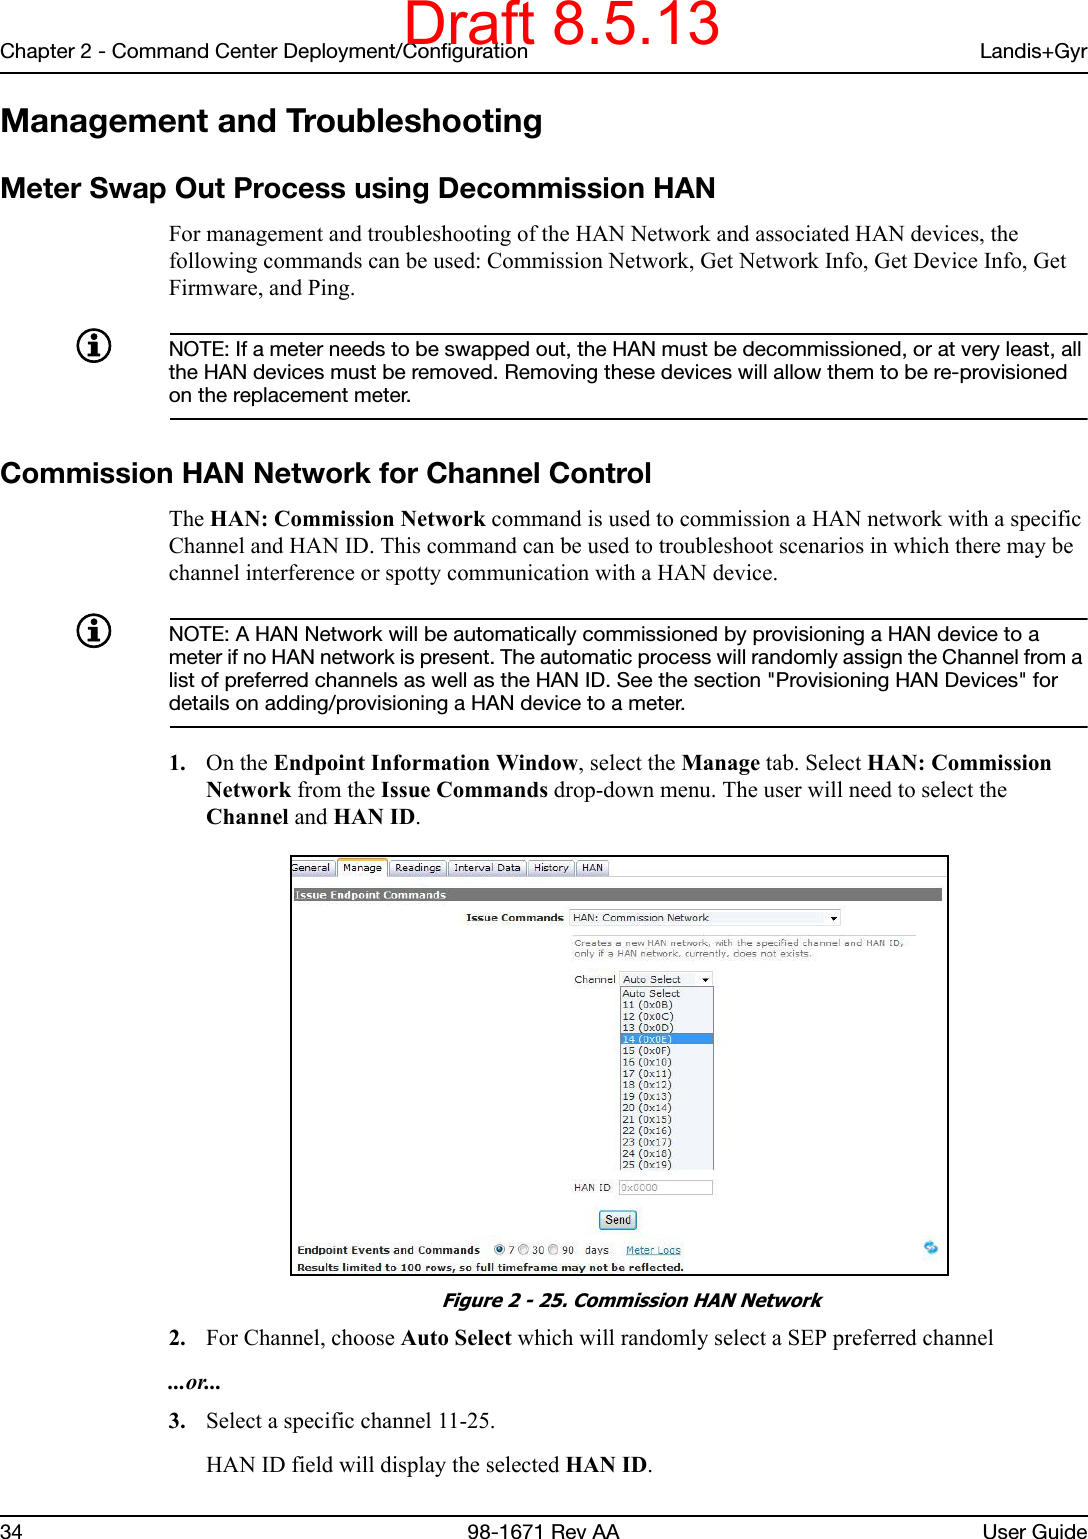 Chapter 2 - Command Center Deployment/Configuration Landis+Gyr34 98-1671 Rev AA User GuideManagement and TroubleshootingMeter Swap Out Process using Decommission HAN For management and troubleshooting of the HAN Network and associated HAN devices, the following commands can be used: Commission Network, Get Network Info, Get Device Info, Get Firmware, and Ping.NOTE: If a meter needs to be swapped out, the HAN must be decommissioned, or at very least, all the HAN devices must be removed. Removing these devices will allow them to be re-provisioned on the replacement meter.    Commission HAN Network for Channel ControlThe HAN: Commission Network command is used to commission a HAN network with a specific Channel and HAN ID. This command can be used to troubleshoot scenarios in which there may be channel interference or spotty communication with a HAN device.NOTE: A HAN Network will be automatically commissioned by provisioning a HAN device to a meter if no HAN network is present. The automatic process will randomly assign the Channel from a list of preferred channels as well as the HAN ID. See the section &quot;Provisioning HAN Devices&quot; for details on adding/provisioning a HAN device to a meter.   1. On the Endpoint Information Window, select the Manage tab. Select HAN: Commission Network from the Issue Commands drop-down menu. The user will need to select the Channel and HAN ID. Figure 2 - 25. Commission HAN Network2. For Channel, choose Auto Select which will randomly select a SEP preferred channel ...or...3. Select a specific channel 11-25.HAN ID field will display the selected HAN ID.Draft 8.5.13